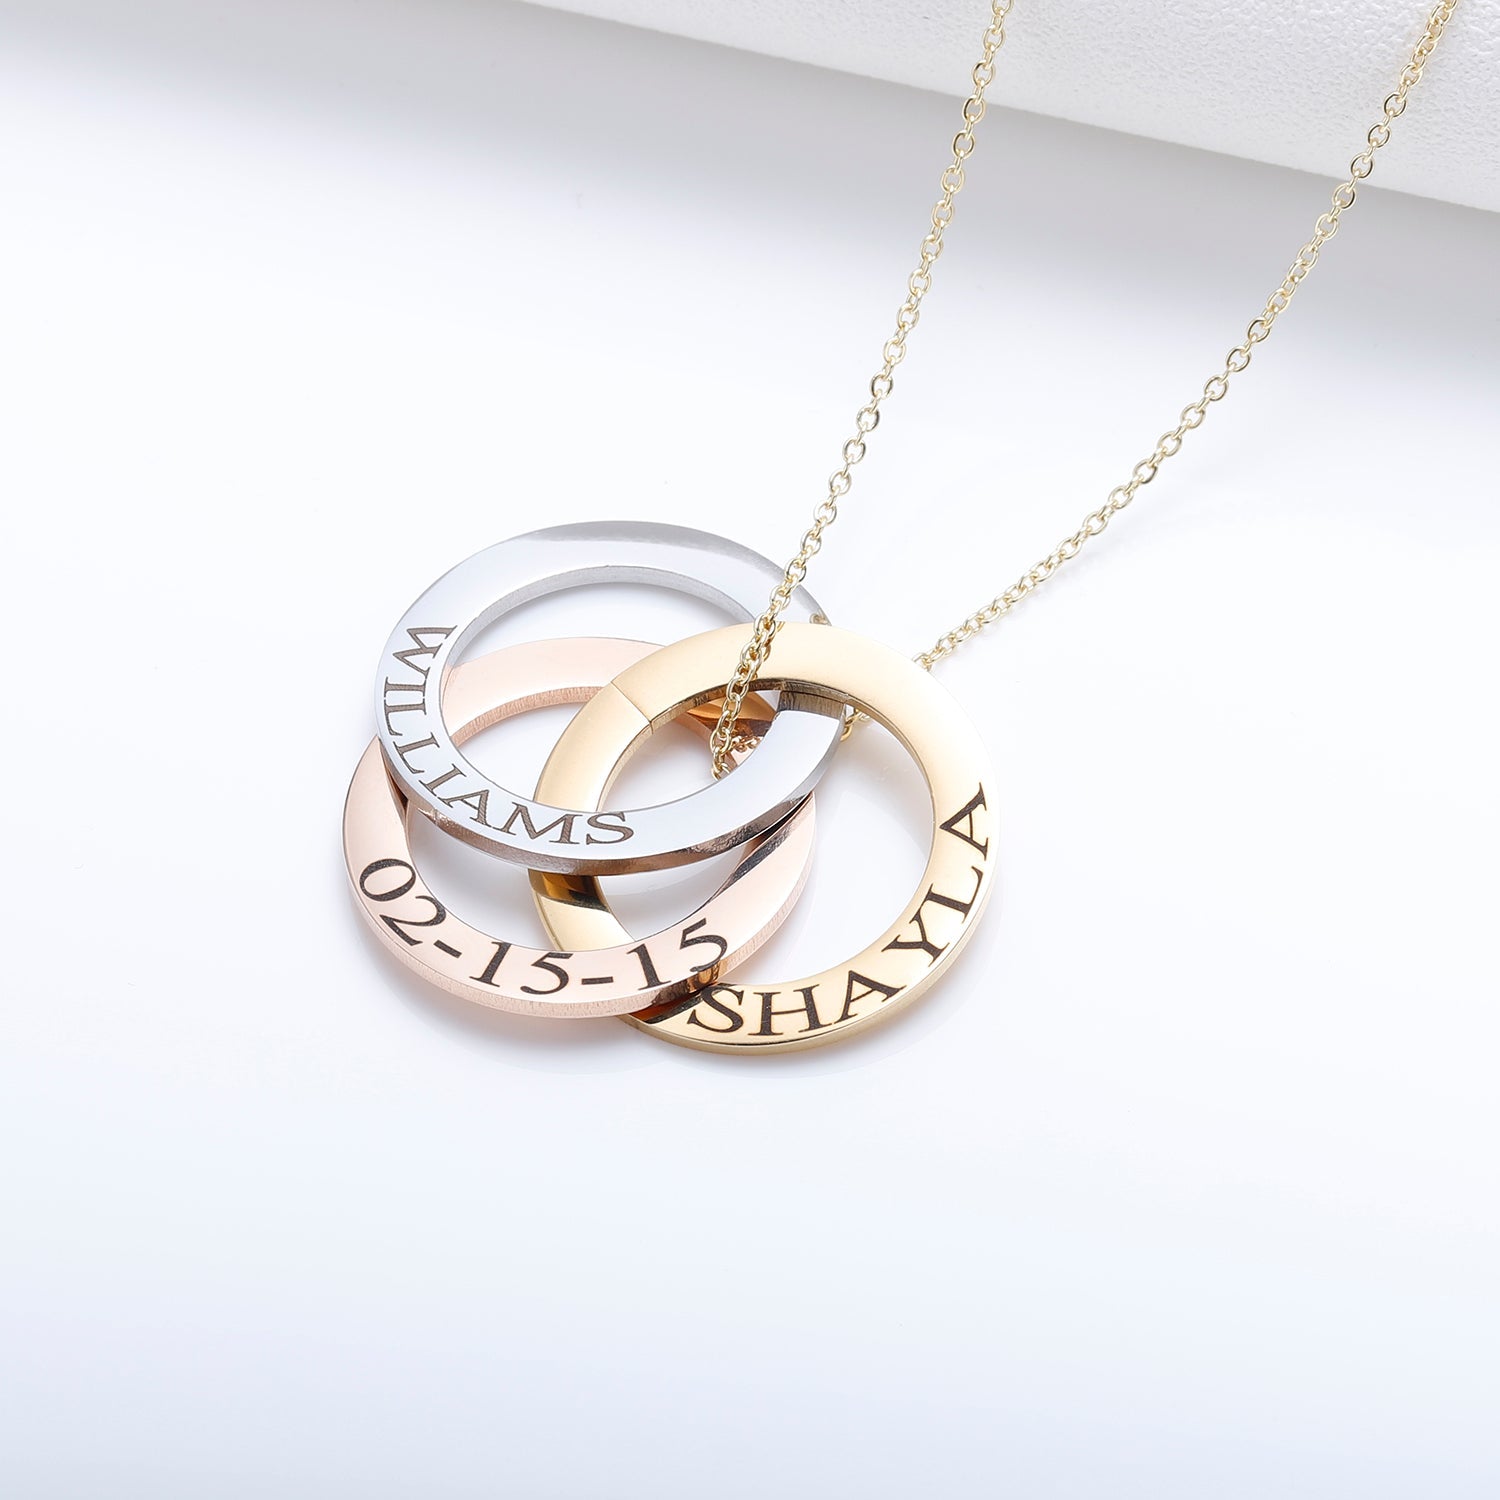 Russian Ring Necklace with Engraving | Three Circle Necklace - Julri Box